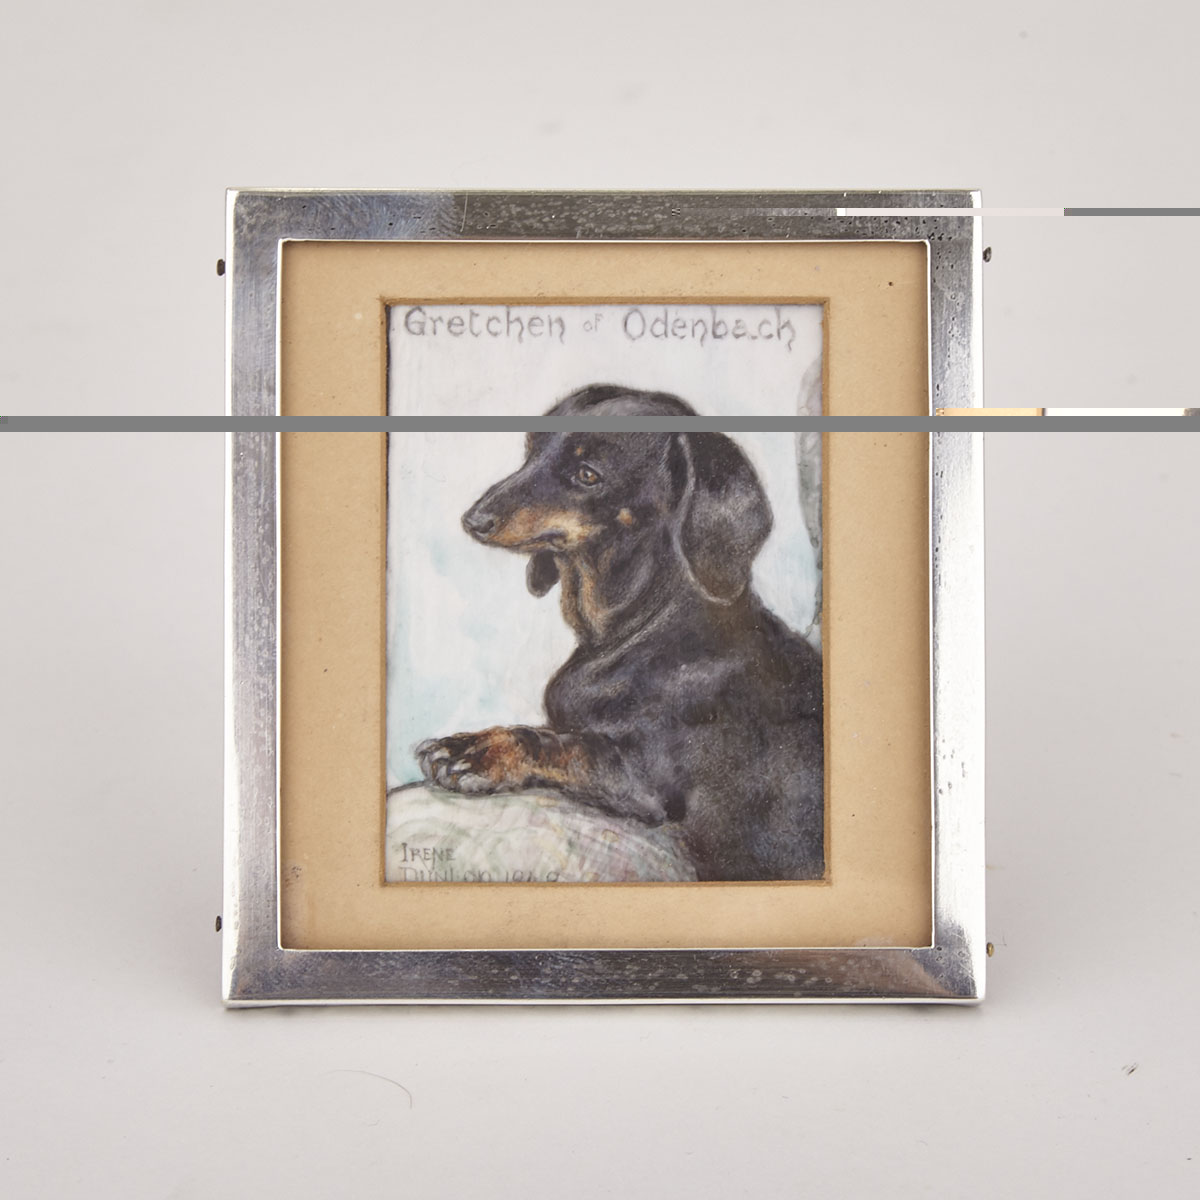 Miniature Picture on Ivory of a Dachshund by Irene Dunlop, 1949